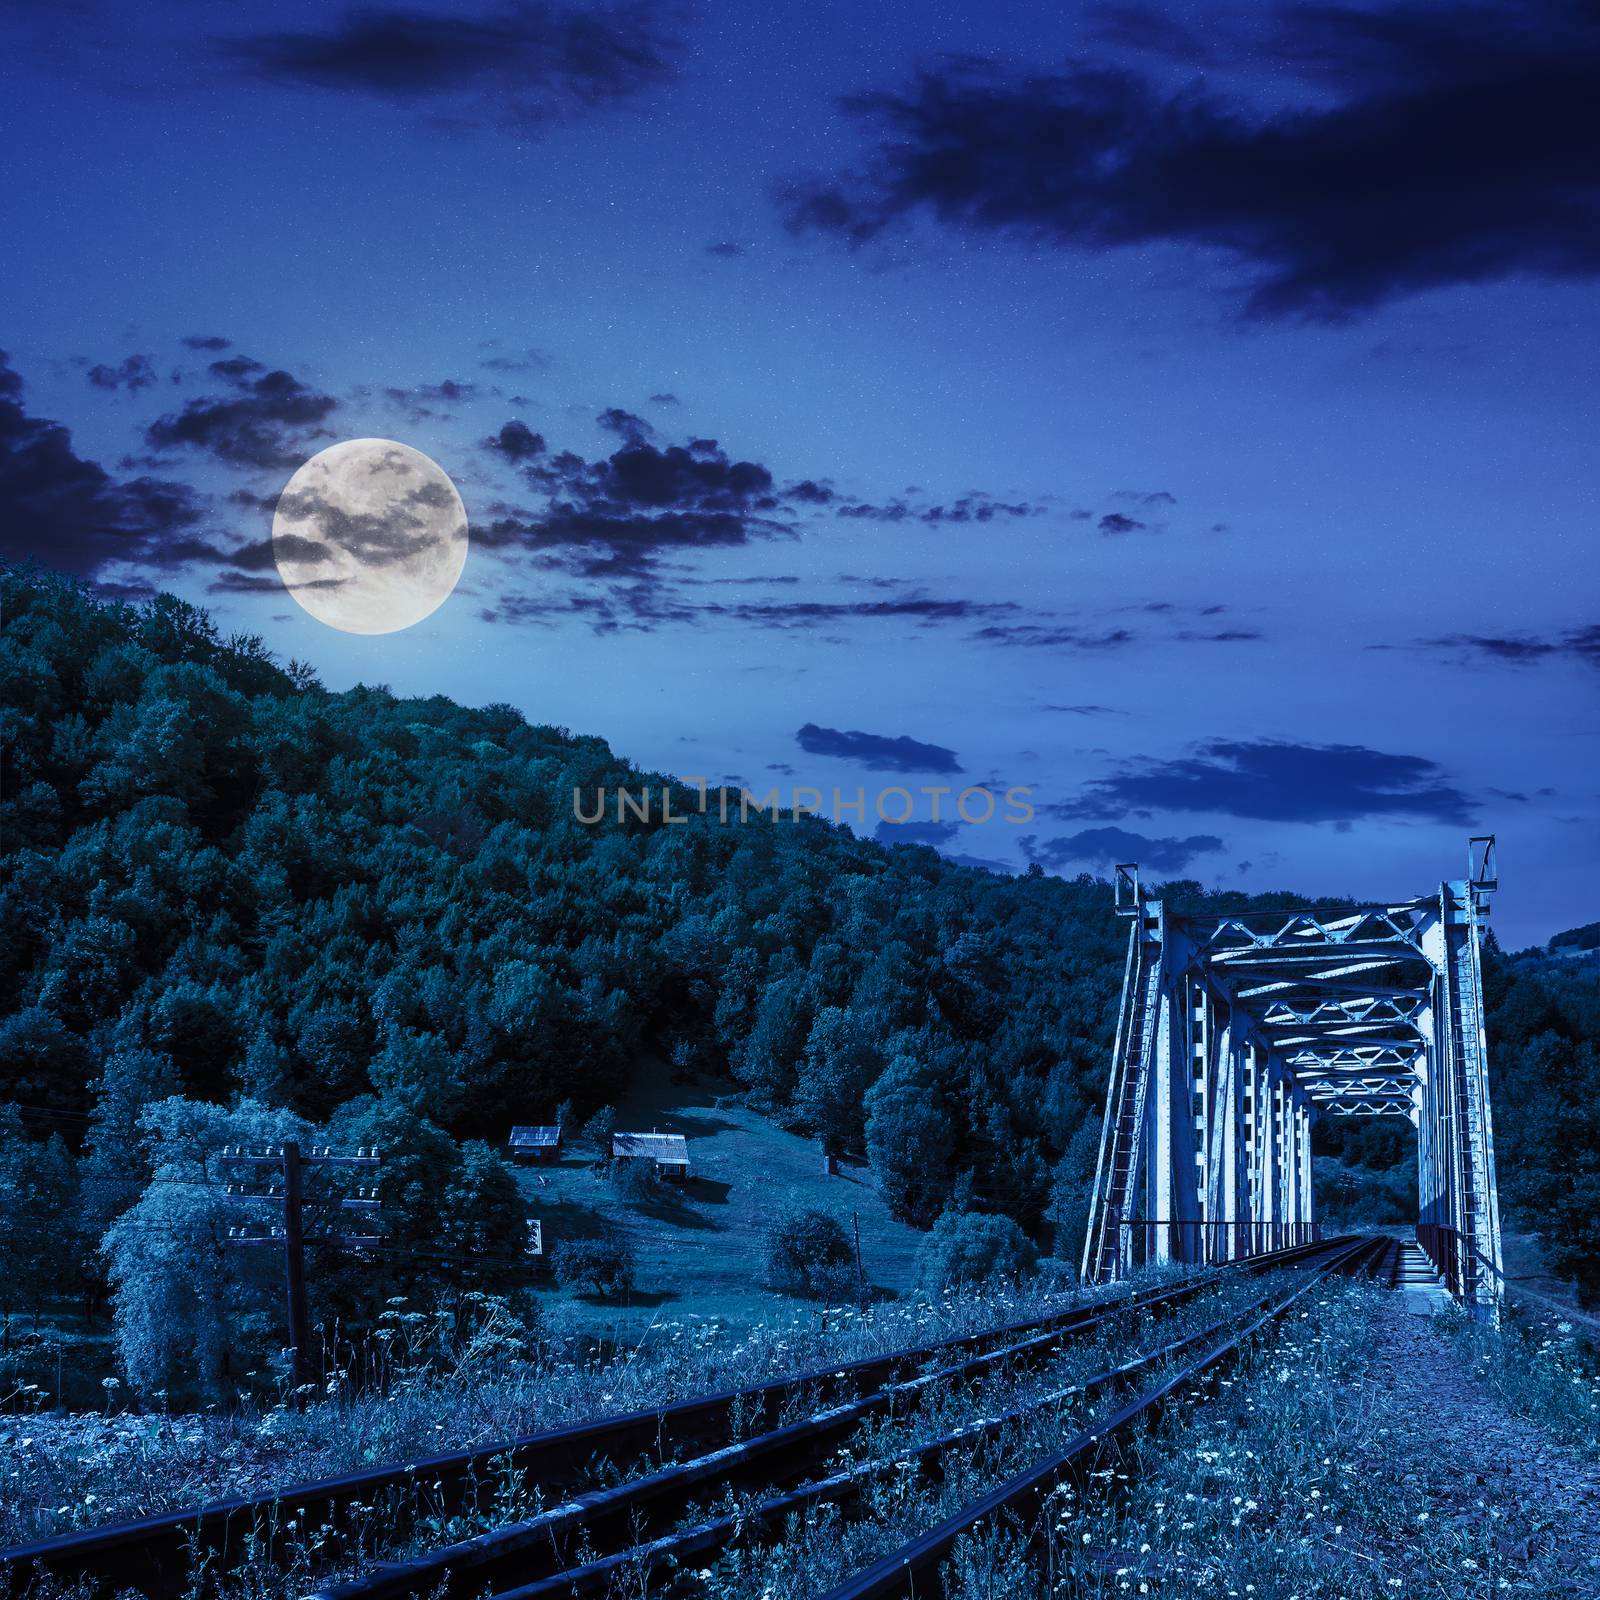 old railroad passes through the metal bridge in the mountain village at night in moon light